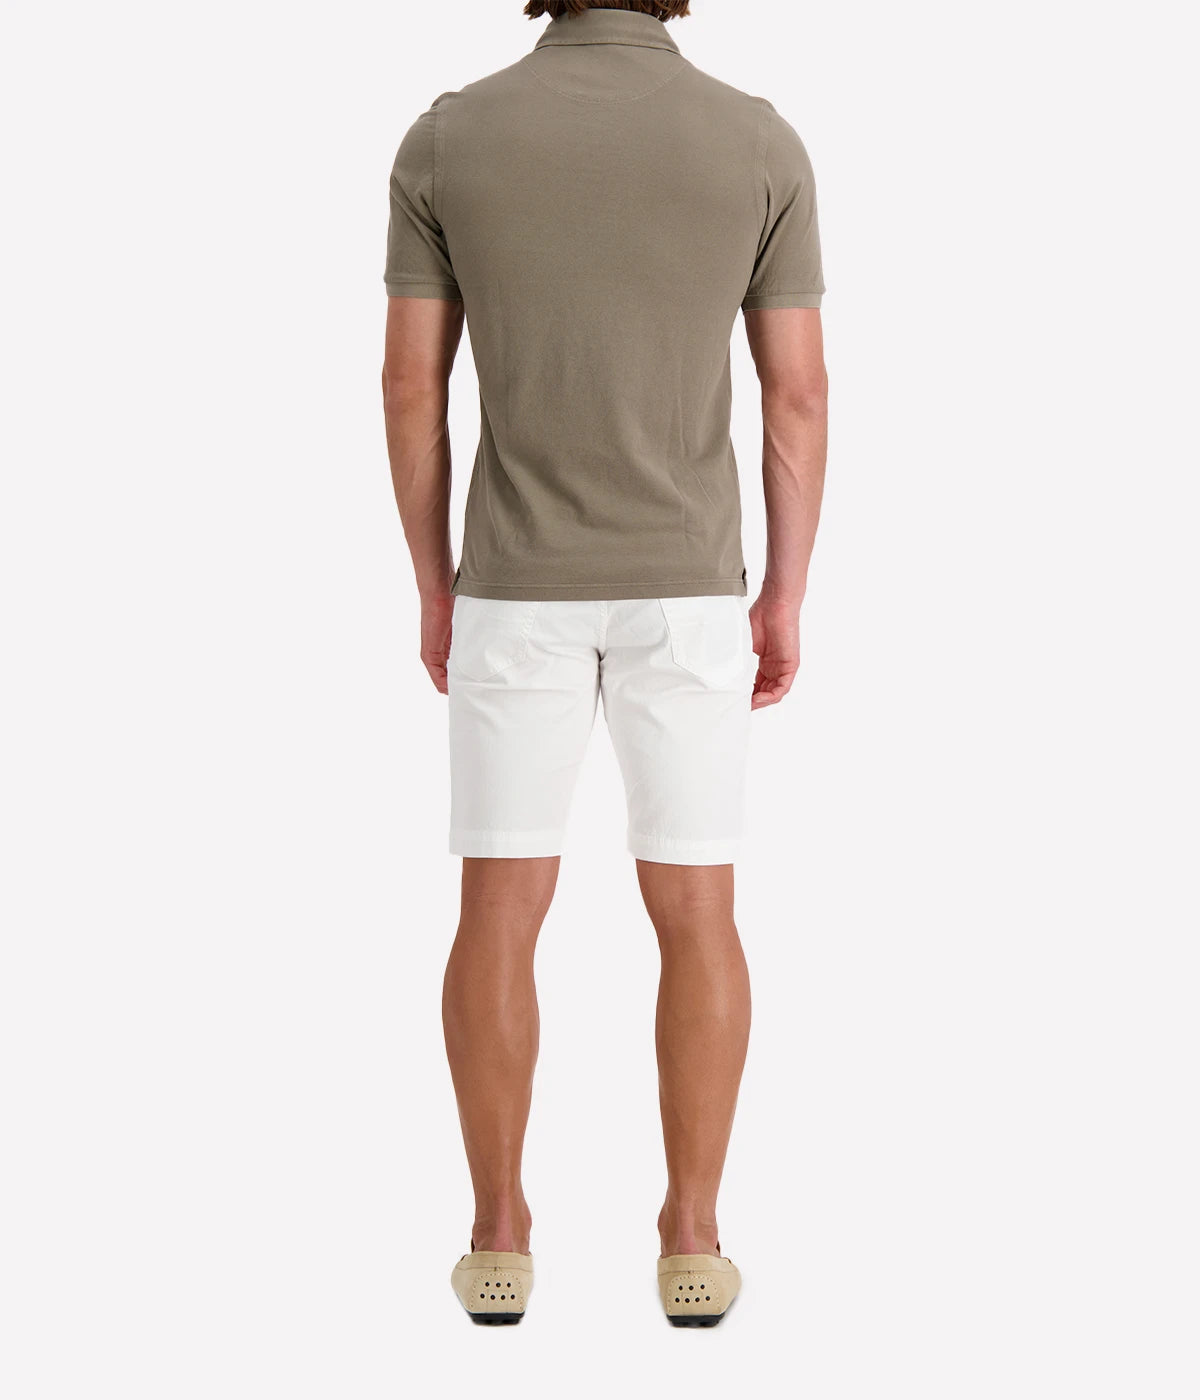 Short Sleeve Polo in Olive